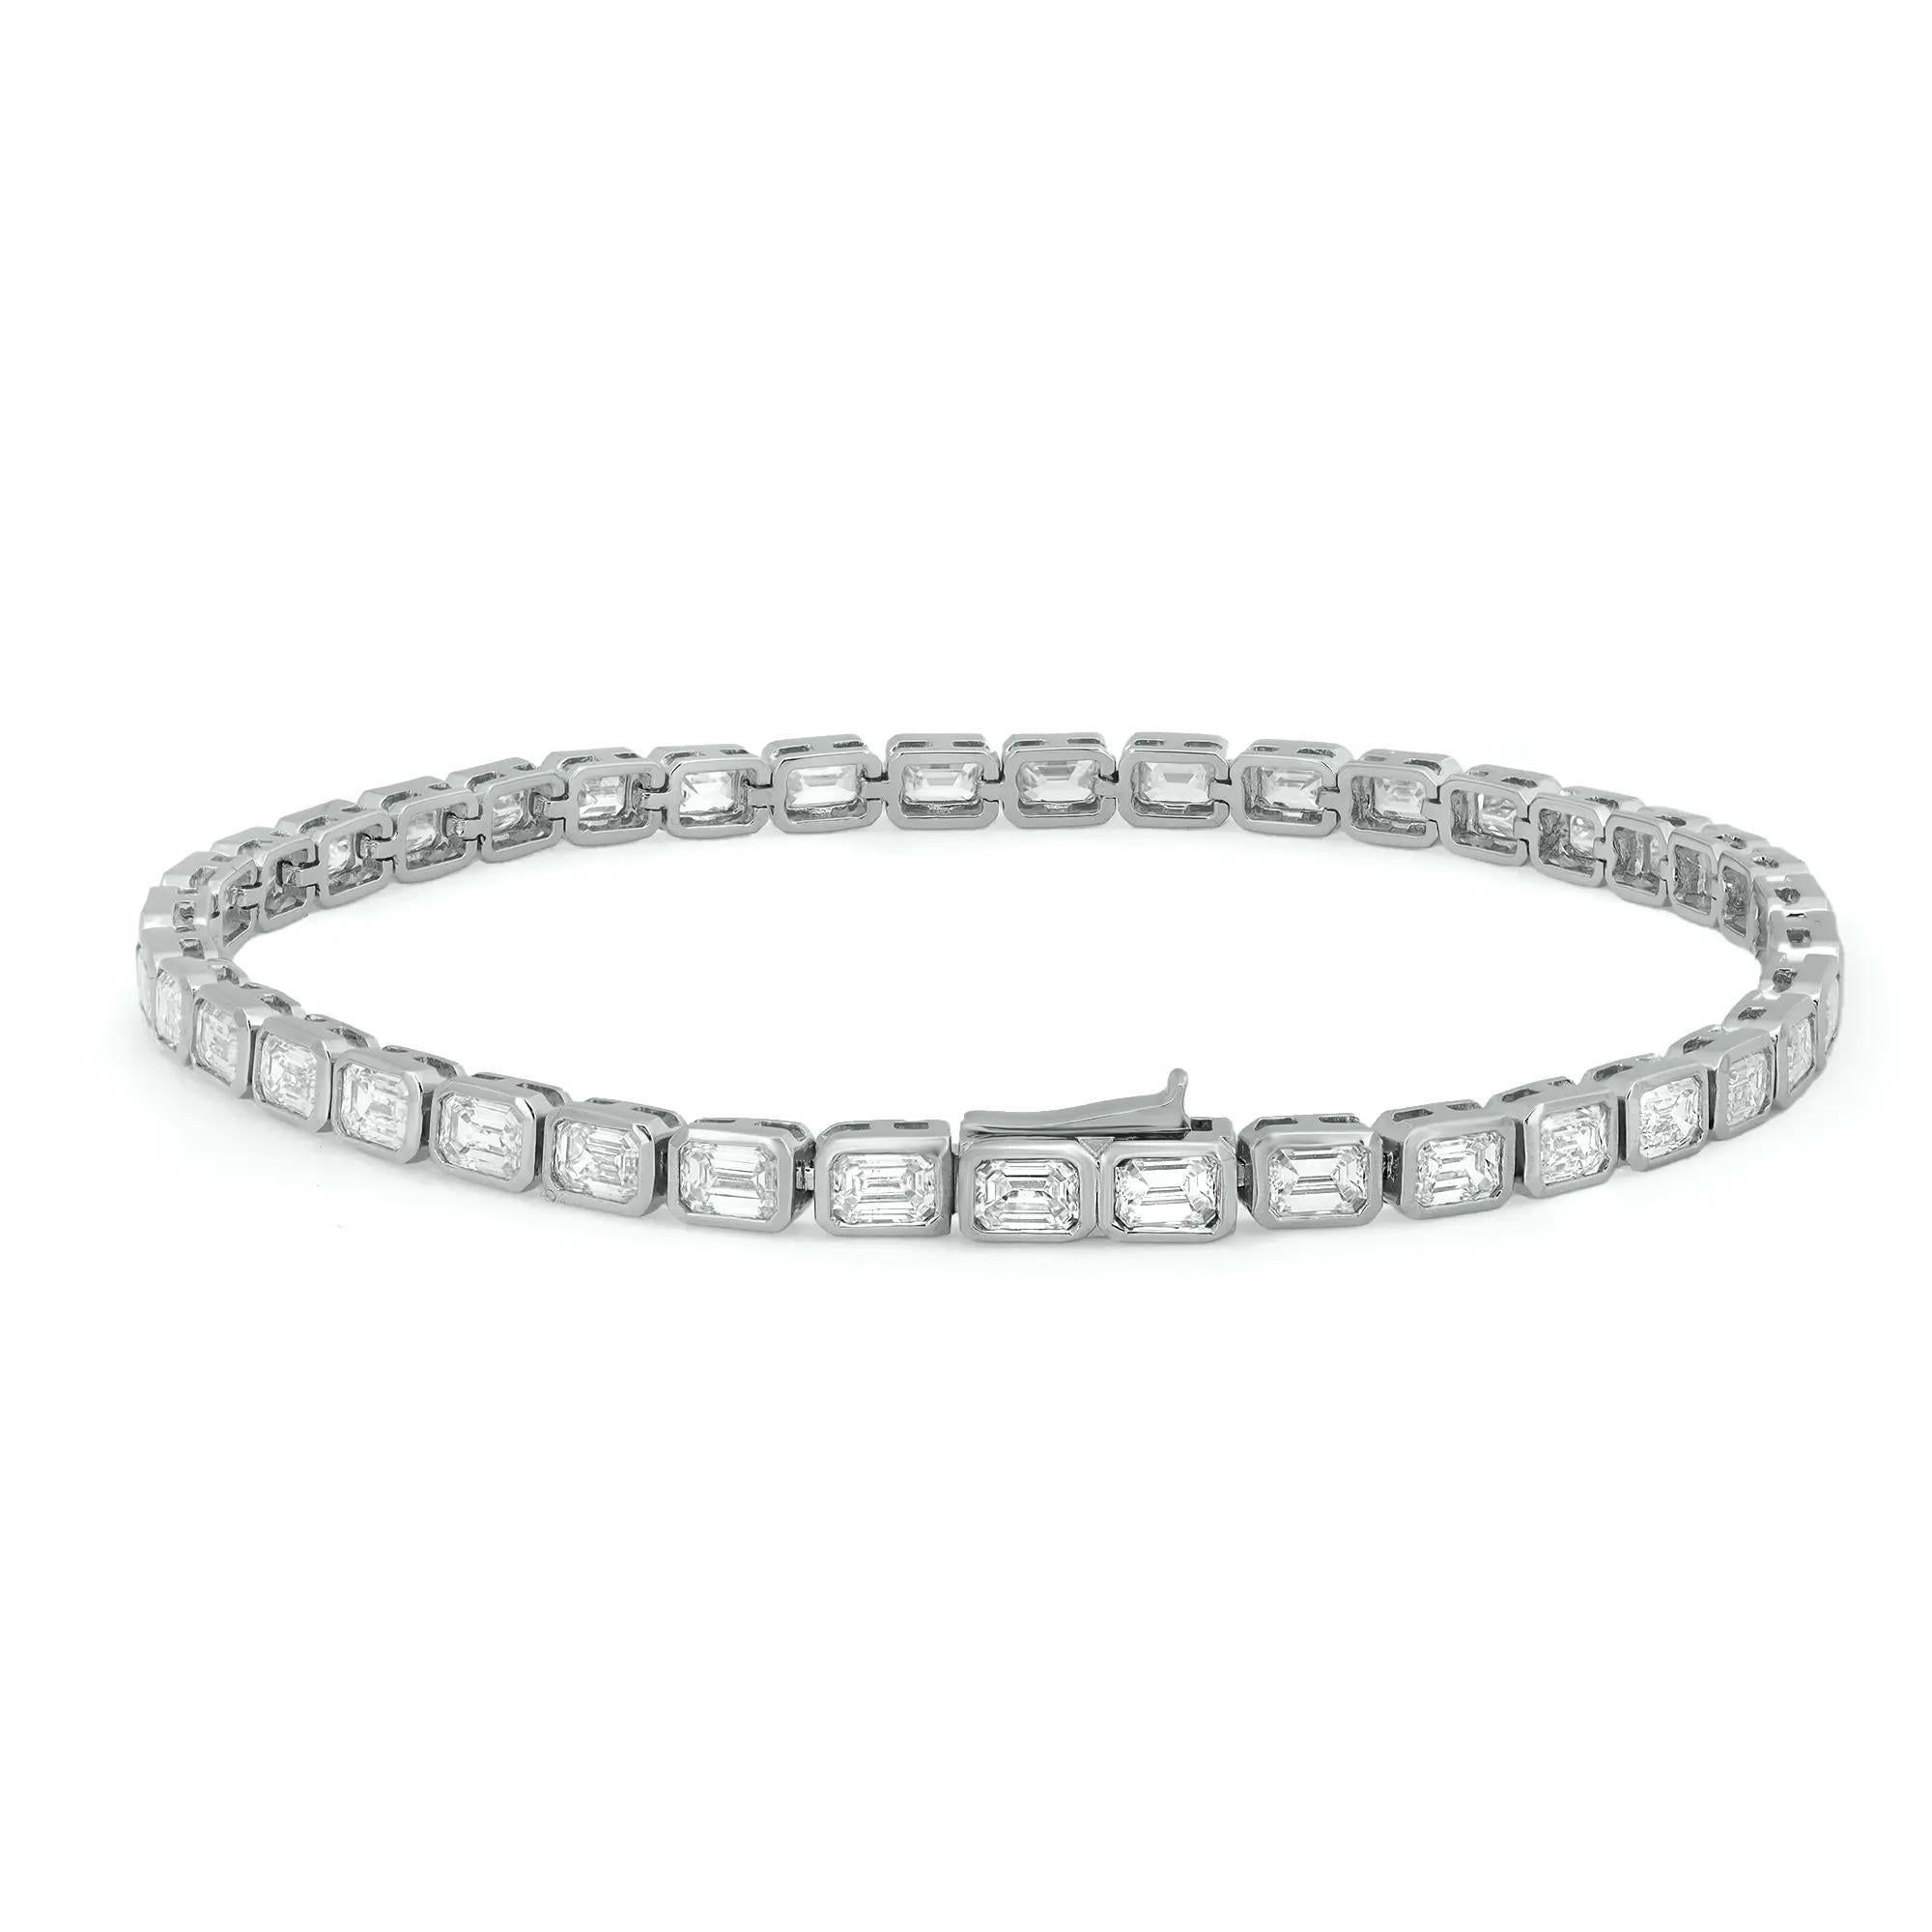 Discover timeless sophistication with our 5.48 Carat Emerald Cut Diamond East-West Bezel Tennis Bracelet in exquisite 18K white gold. This bracelet is a stunning fusion of classic elegance and modern design, featuring emerald-cut diamonds set